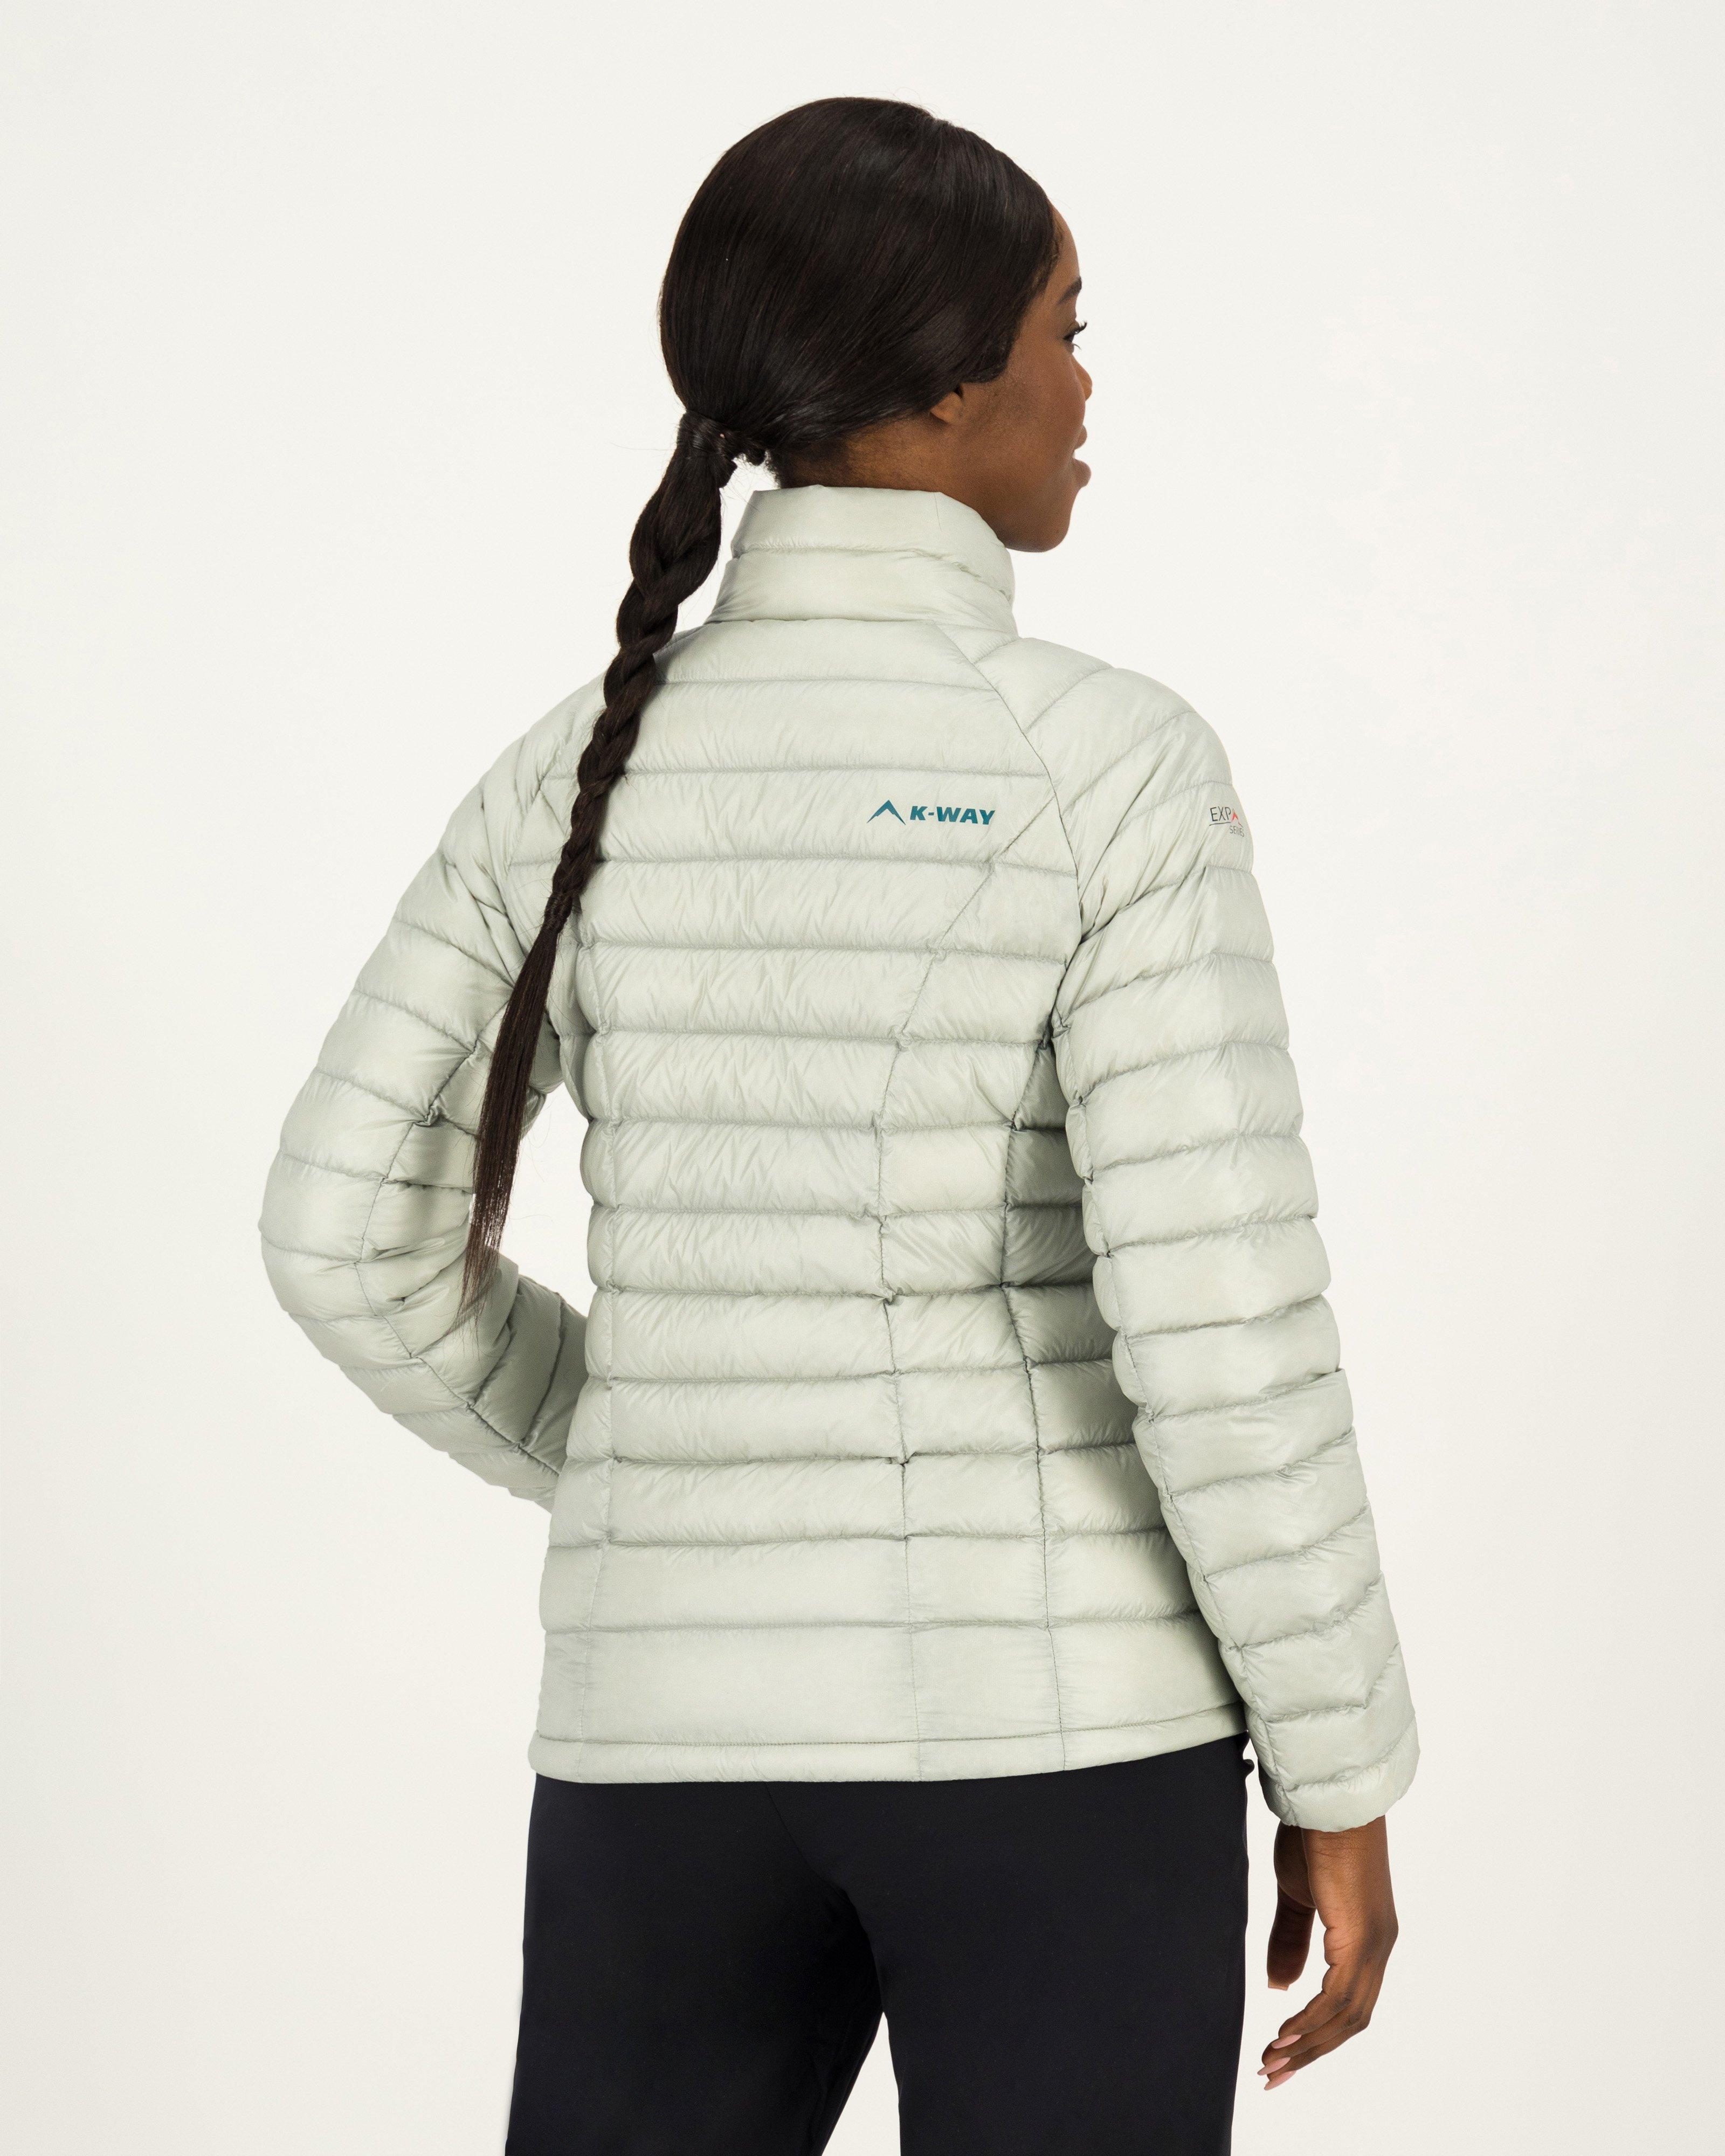 K-Way Expedition Series Women’s Helena Down Jacket